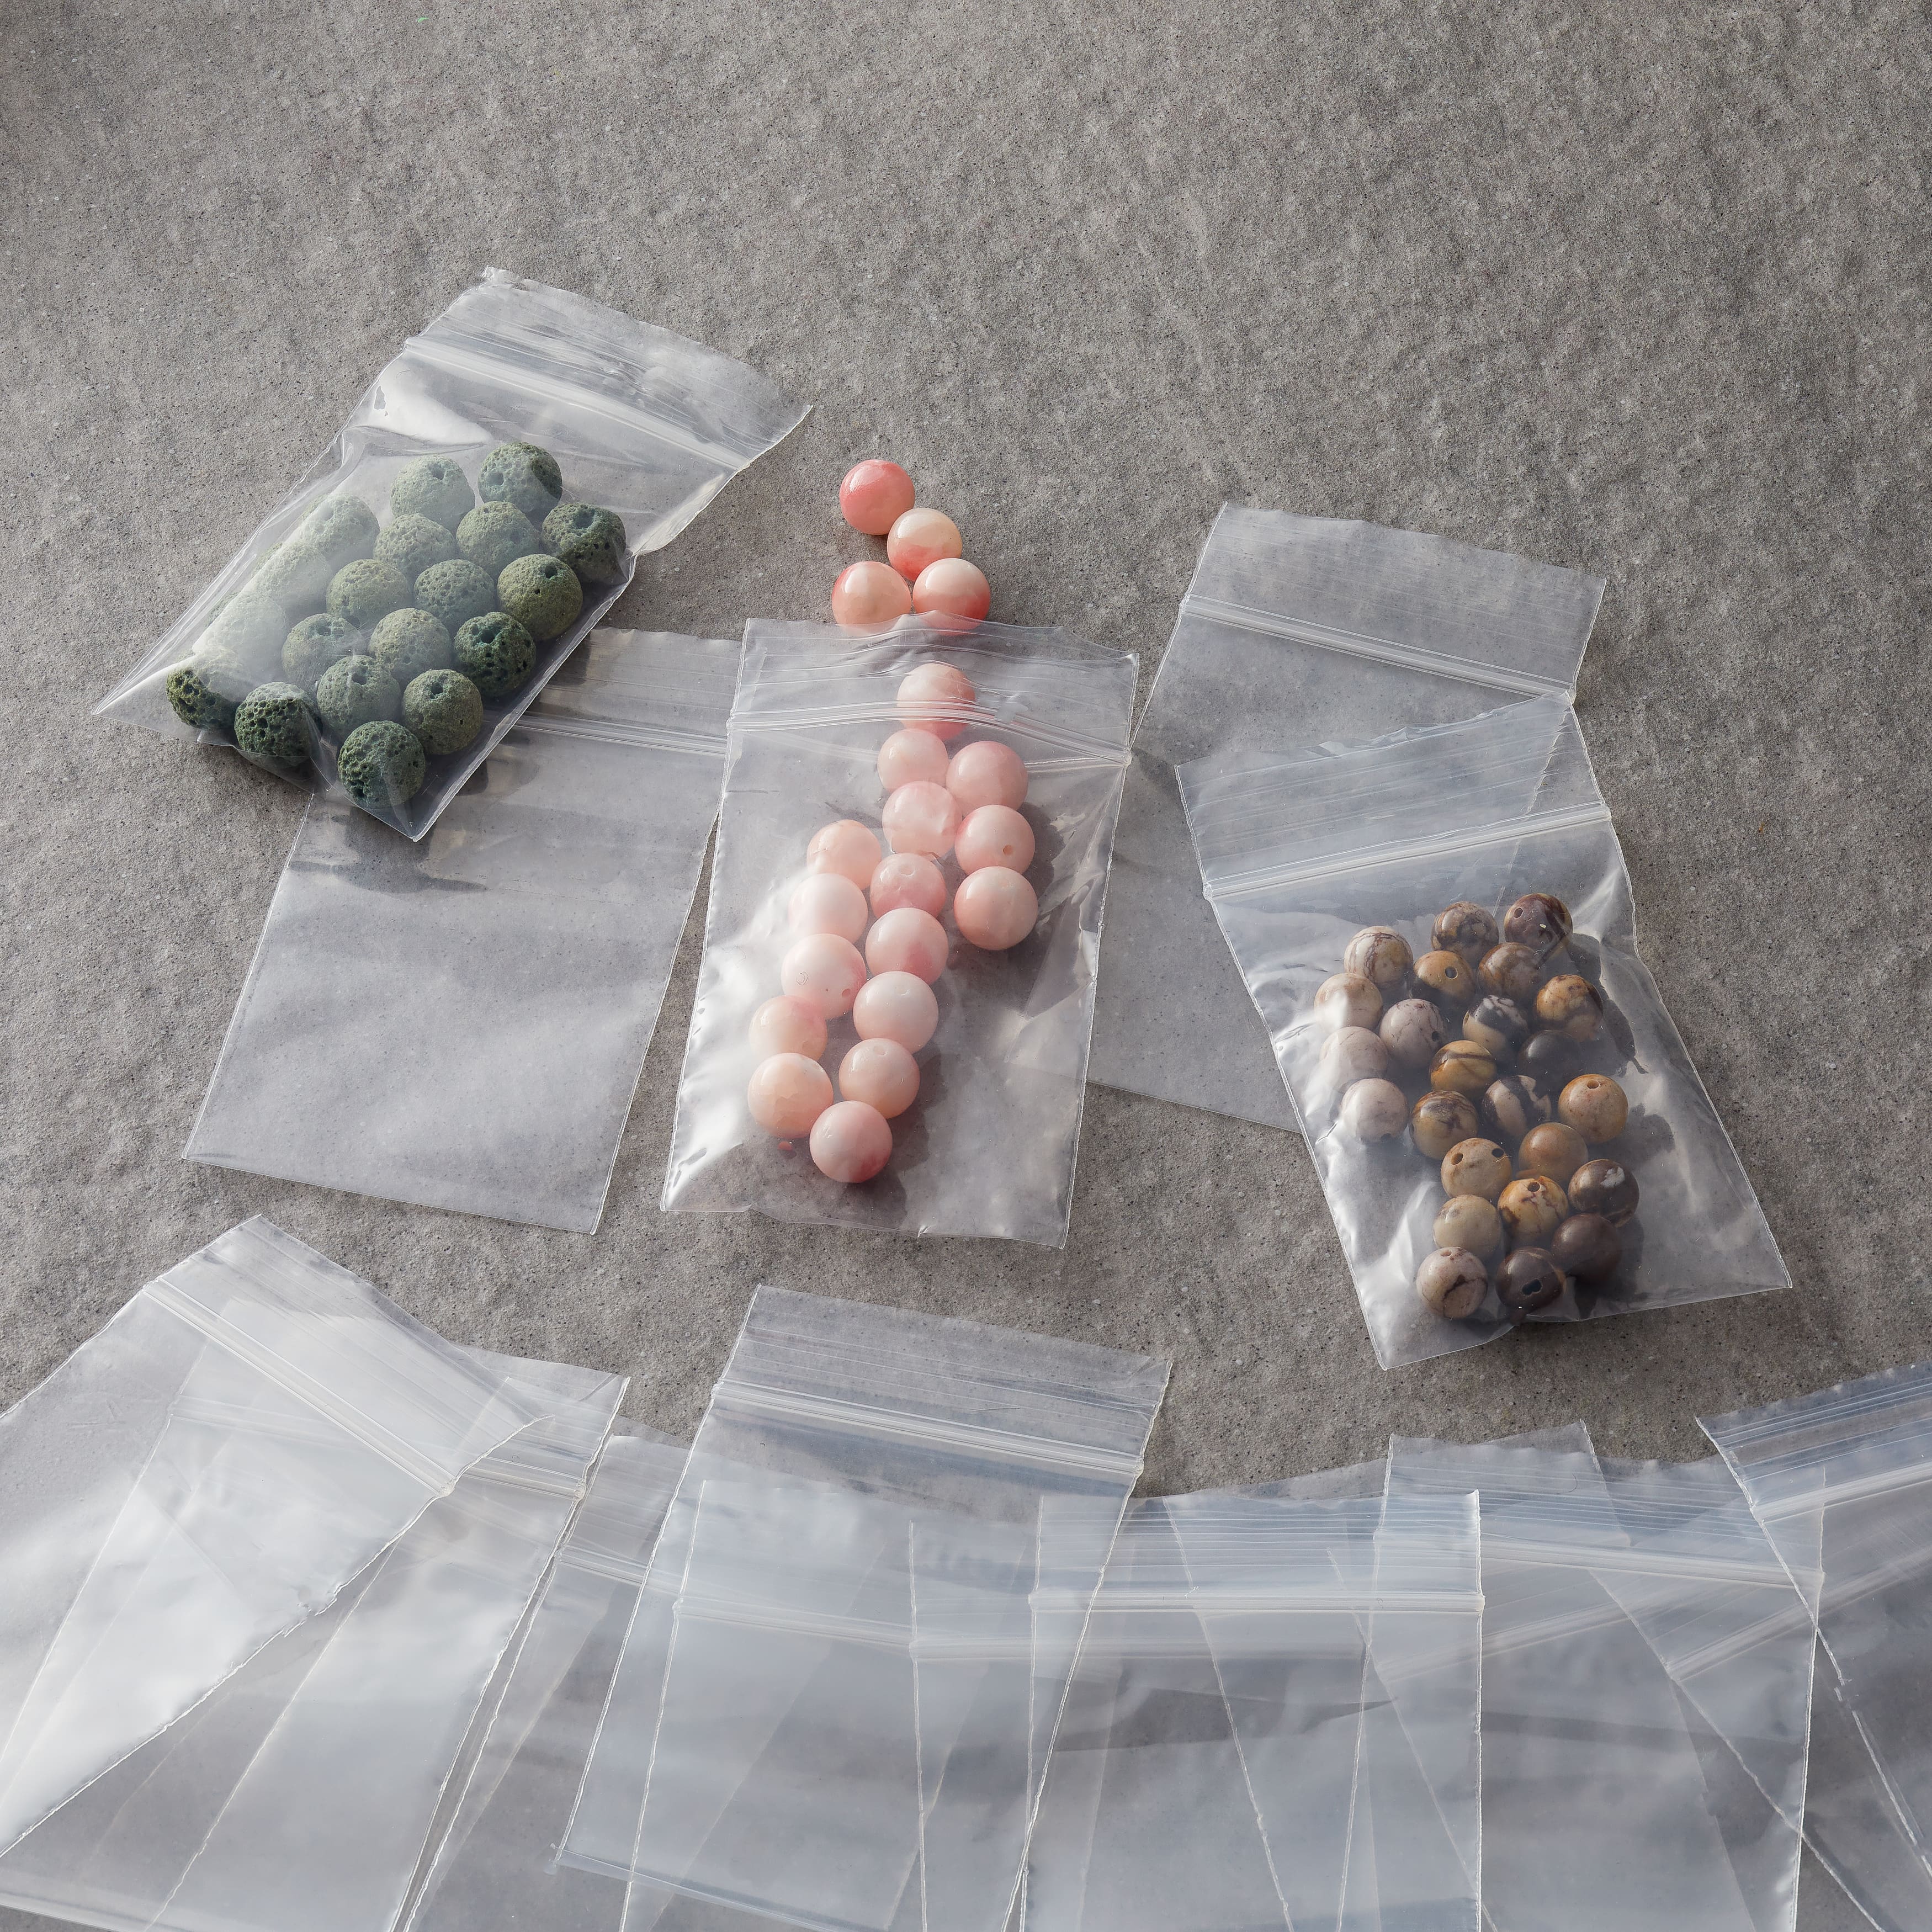 2 x 3 Resealable Zip Bags by Bead Landing in Clear | Michaels